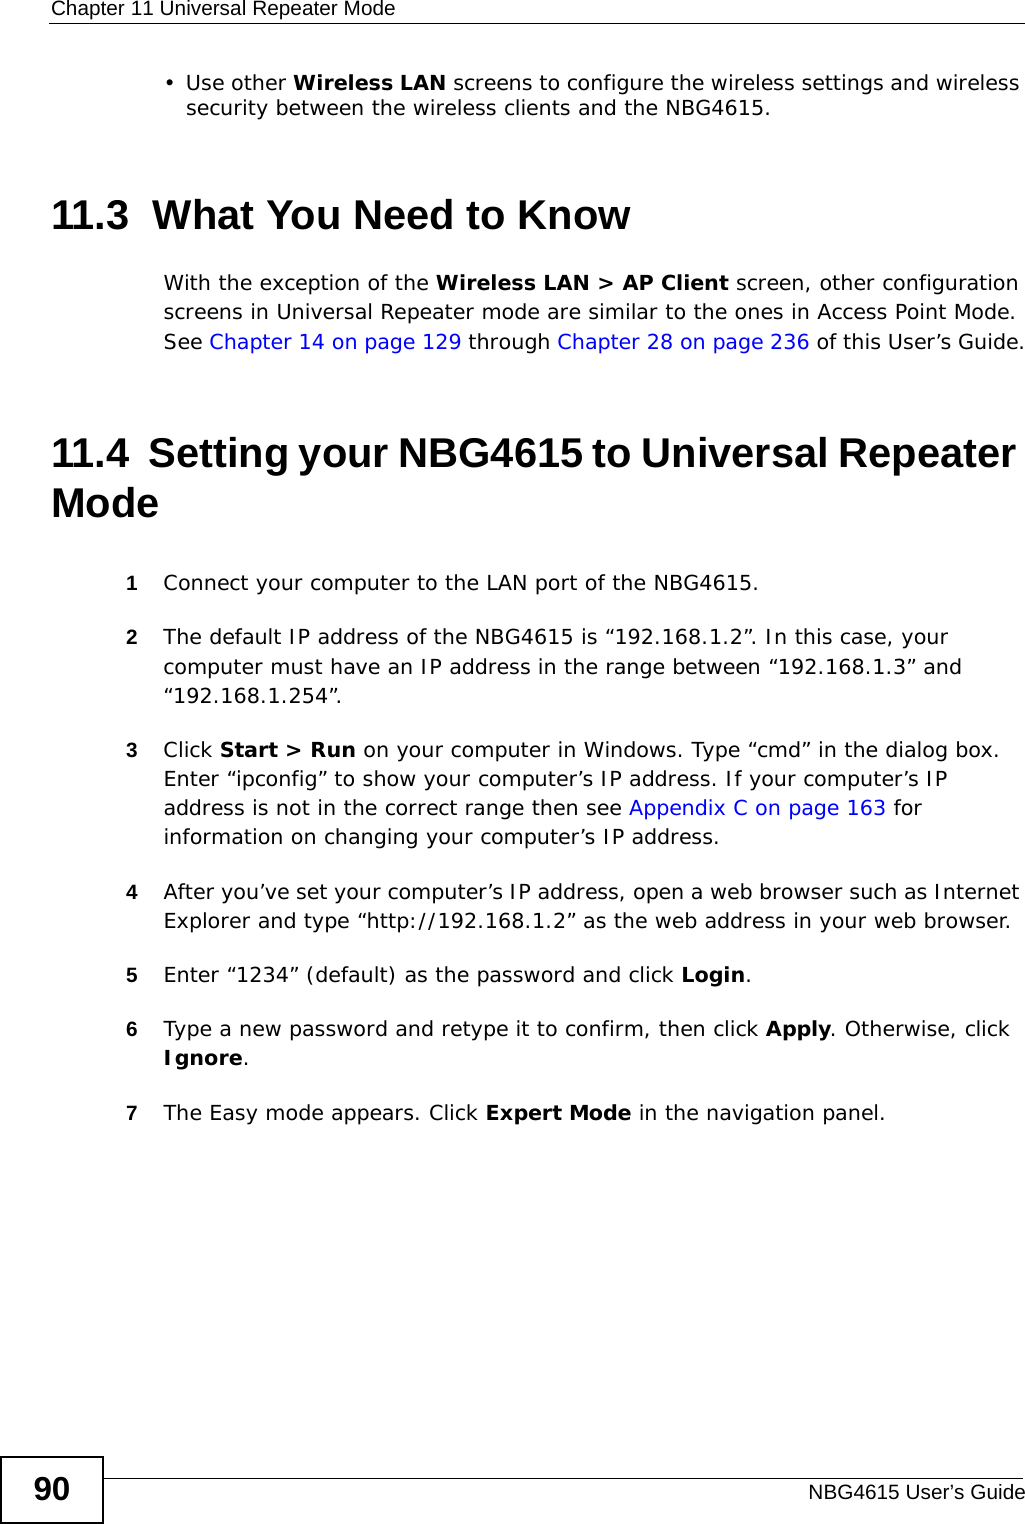 Chapter 11 Universal Repeater ModeNBG4615 User’s Guide90•Use other Wireless LAN screens to configure the wireless settings and wireless security between the wireless clients and the NBG4615.11.3  What You Need to KnowWith the exception of the Wireless LAN &gt; AP Client screen, other configuration screens in Universal Repeater mode are similar to the ones in Access Point Mode. See Chapter 14 on page 129 through Chapter 28 on page 236 of this User’s Guide.11.4  Setting your NBG4615 to Universal Repeater Mode1Connect your computer to the LAN port of the NBG4615. 2The default IP address of the NBG4615 is “192.168.1.2”. In this case, your computer must have an IP address in the range between “192.168.1.3” and “192.168.1.254”.3Click Start &gt; Run on your computer in Windows. Type “cmd” in the dialog box. Enter “ipconfig” to show your computer’s IP address. If your computer’s IP address is not in the correct range then see Appendix C on page 163 for information on changing your computer’s IP address.4After you’ve set your computer’s IP address, open a web browser such as Internet Explorer and type “http://192.168.1.2” as the web address in your web browser.5Enter “1234” (default) as the password and click Login.6Type a new password and retype it to confirm, then click Apply. Otherwise, click Ignore.7The Easy mode appears. Click Expert Mode in the navigation panel.